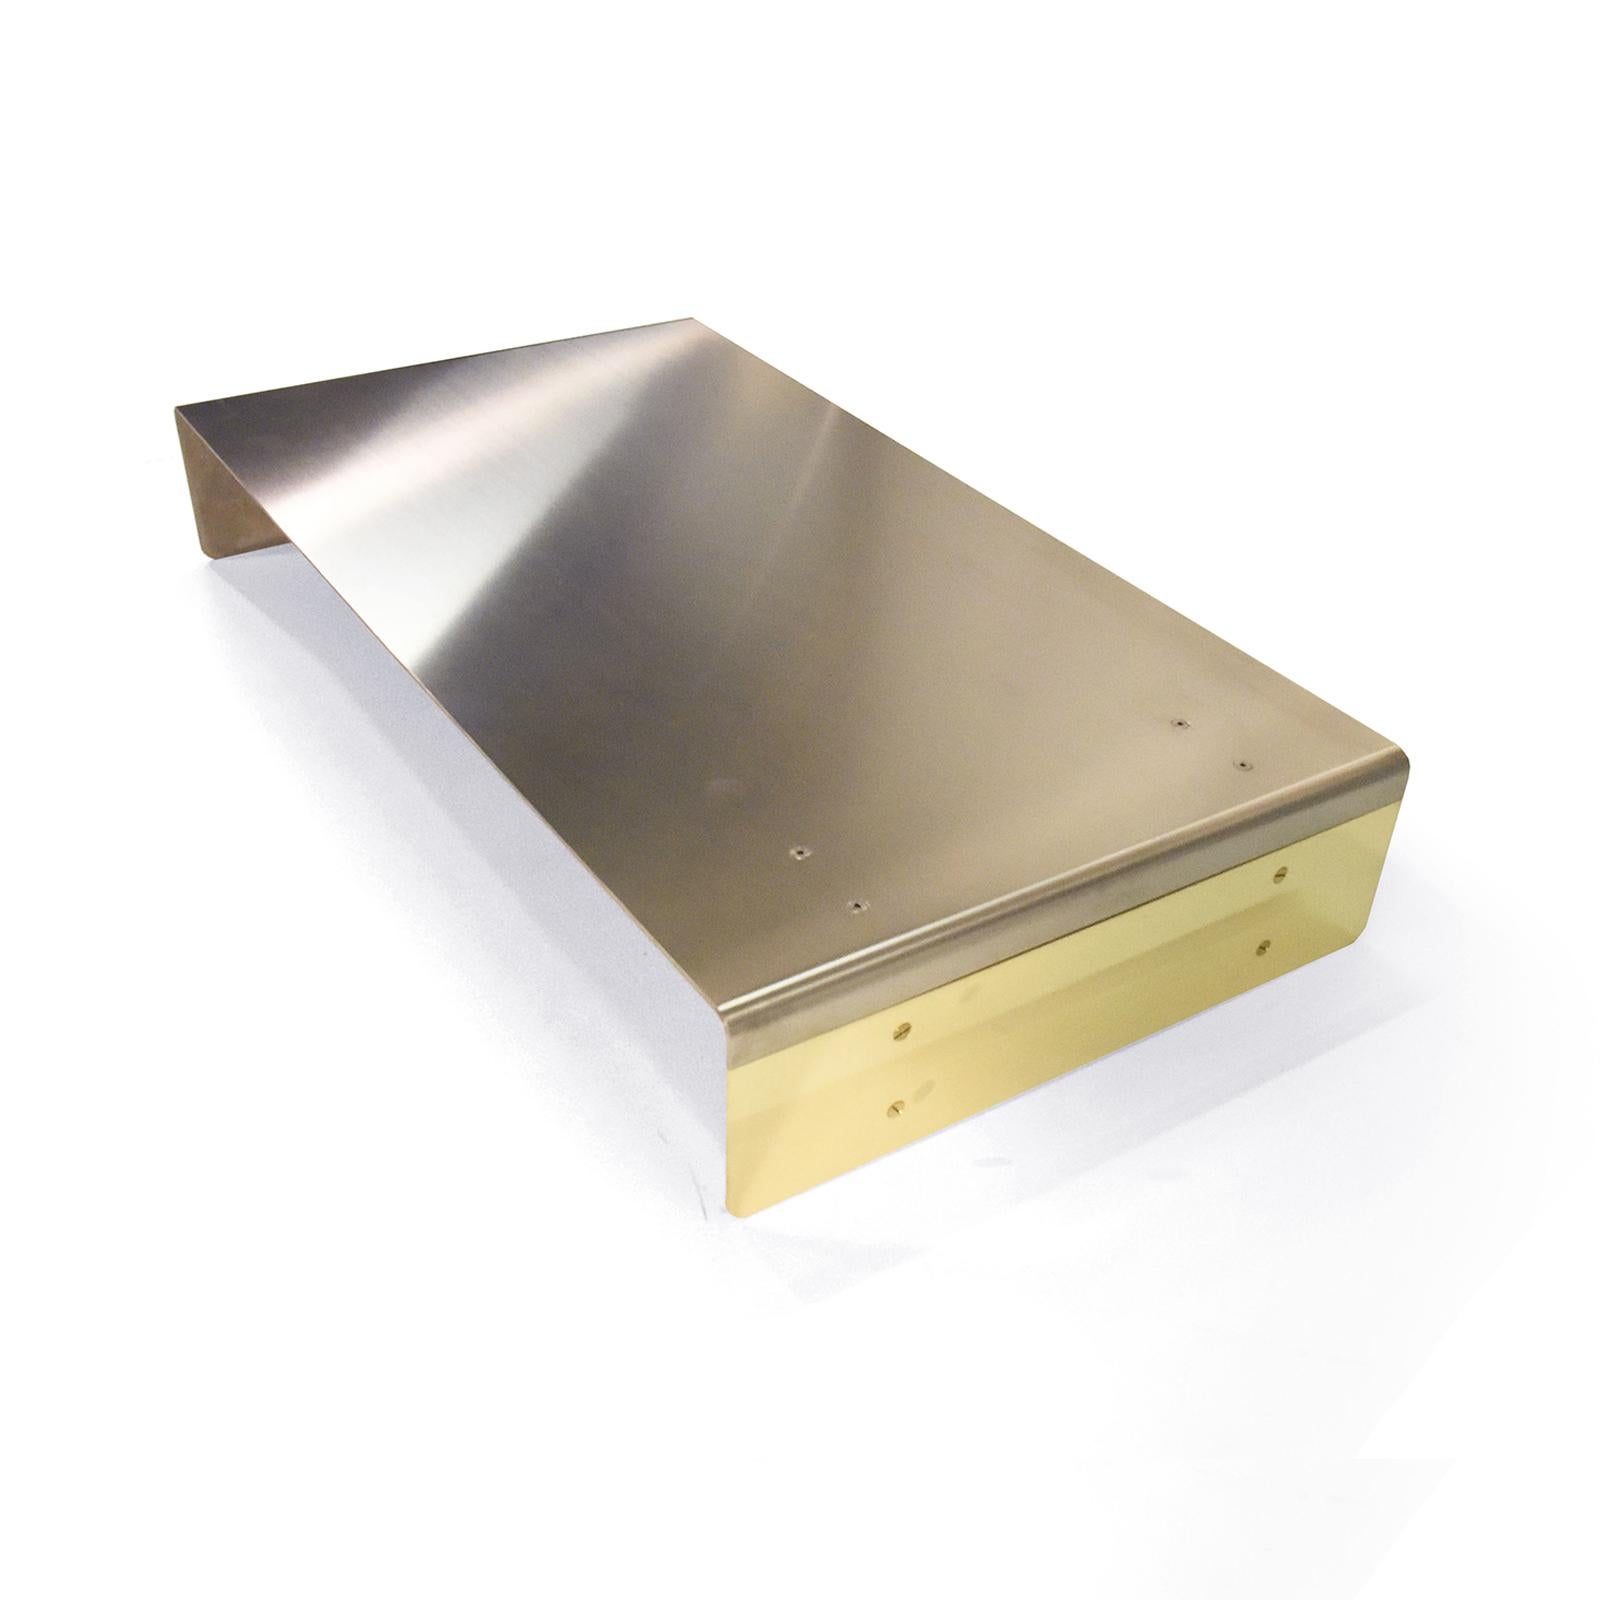 Modern Rossana Orlandi Grace Coffee Table in Brass and Steel by Matteo Casalegno For Sale